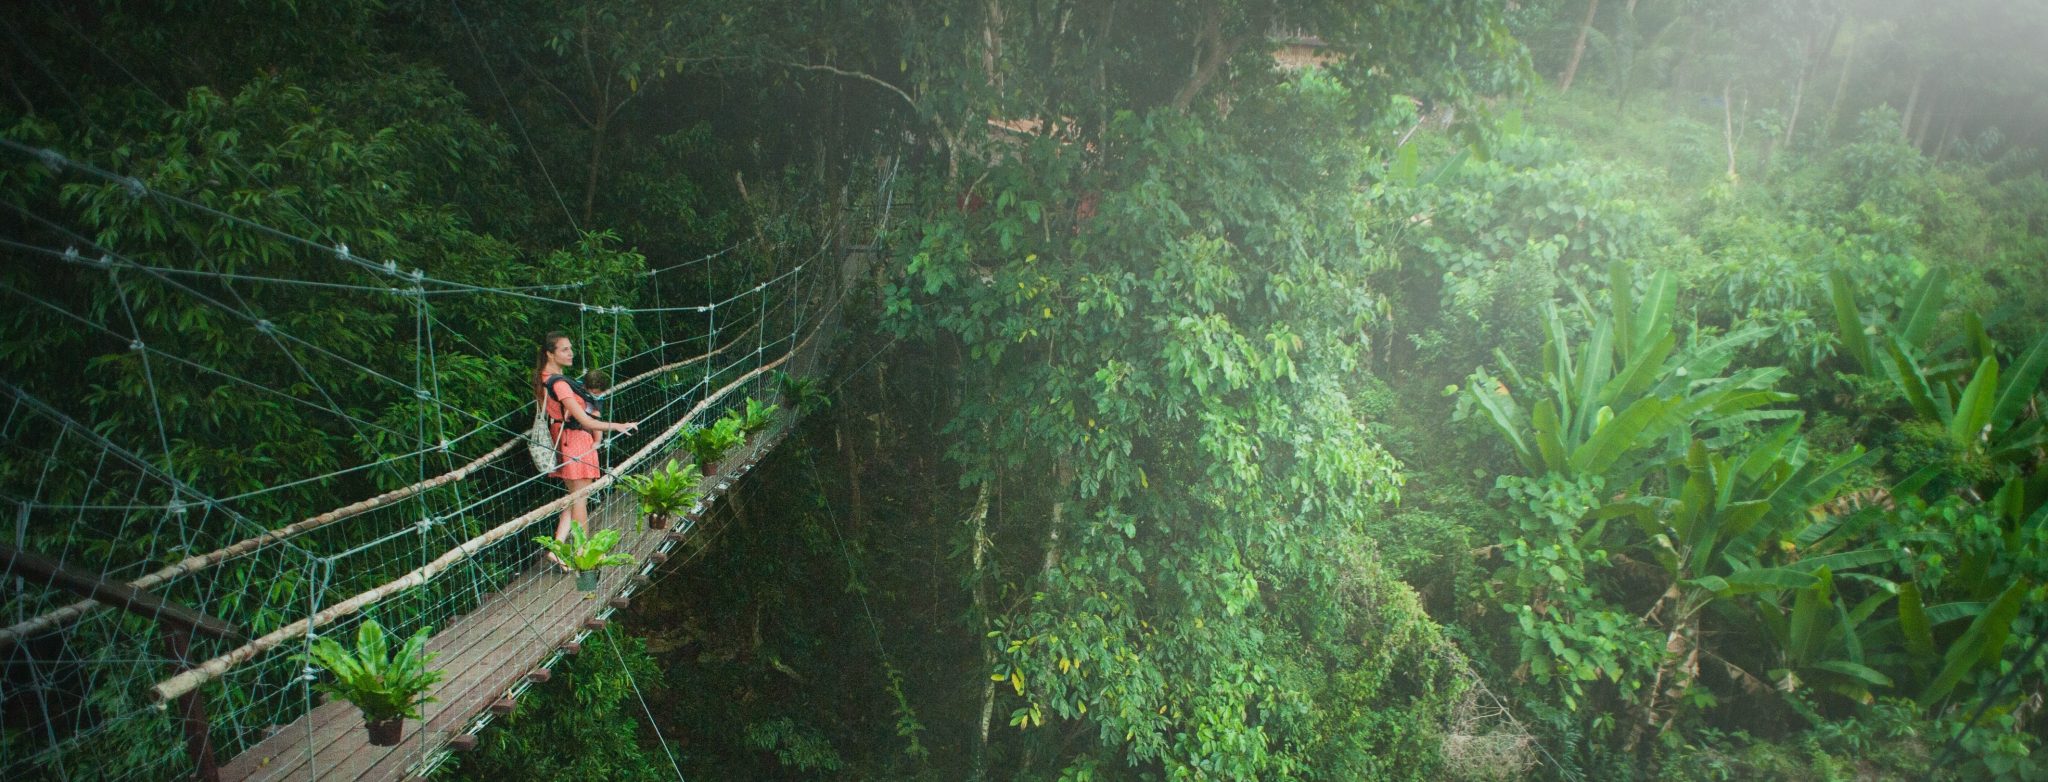 5 Reasons You Should Visit Costa Rica’s Cloud Forests